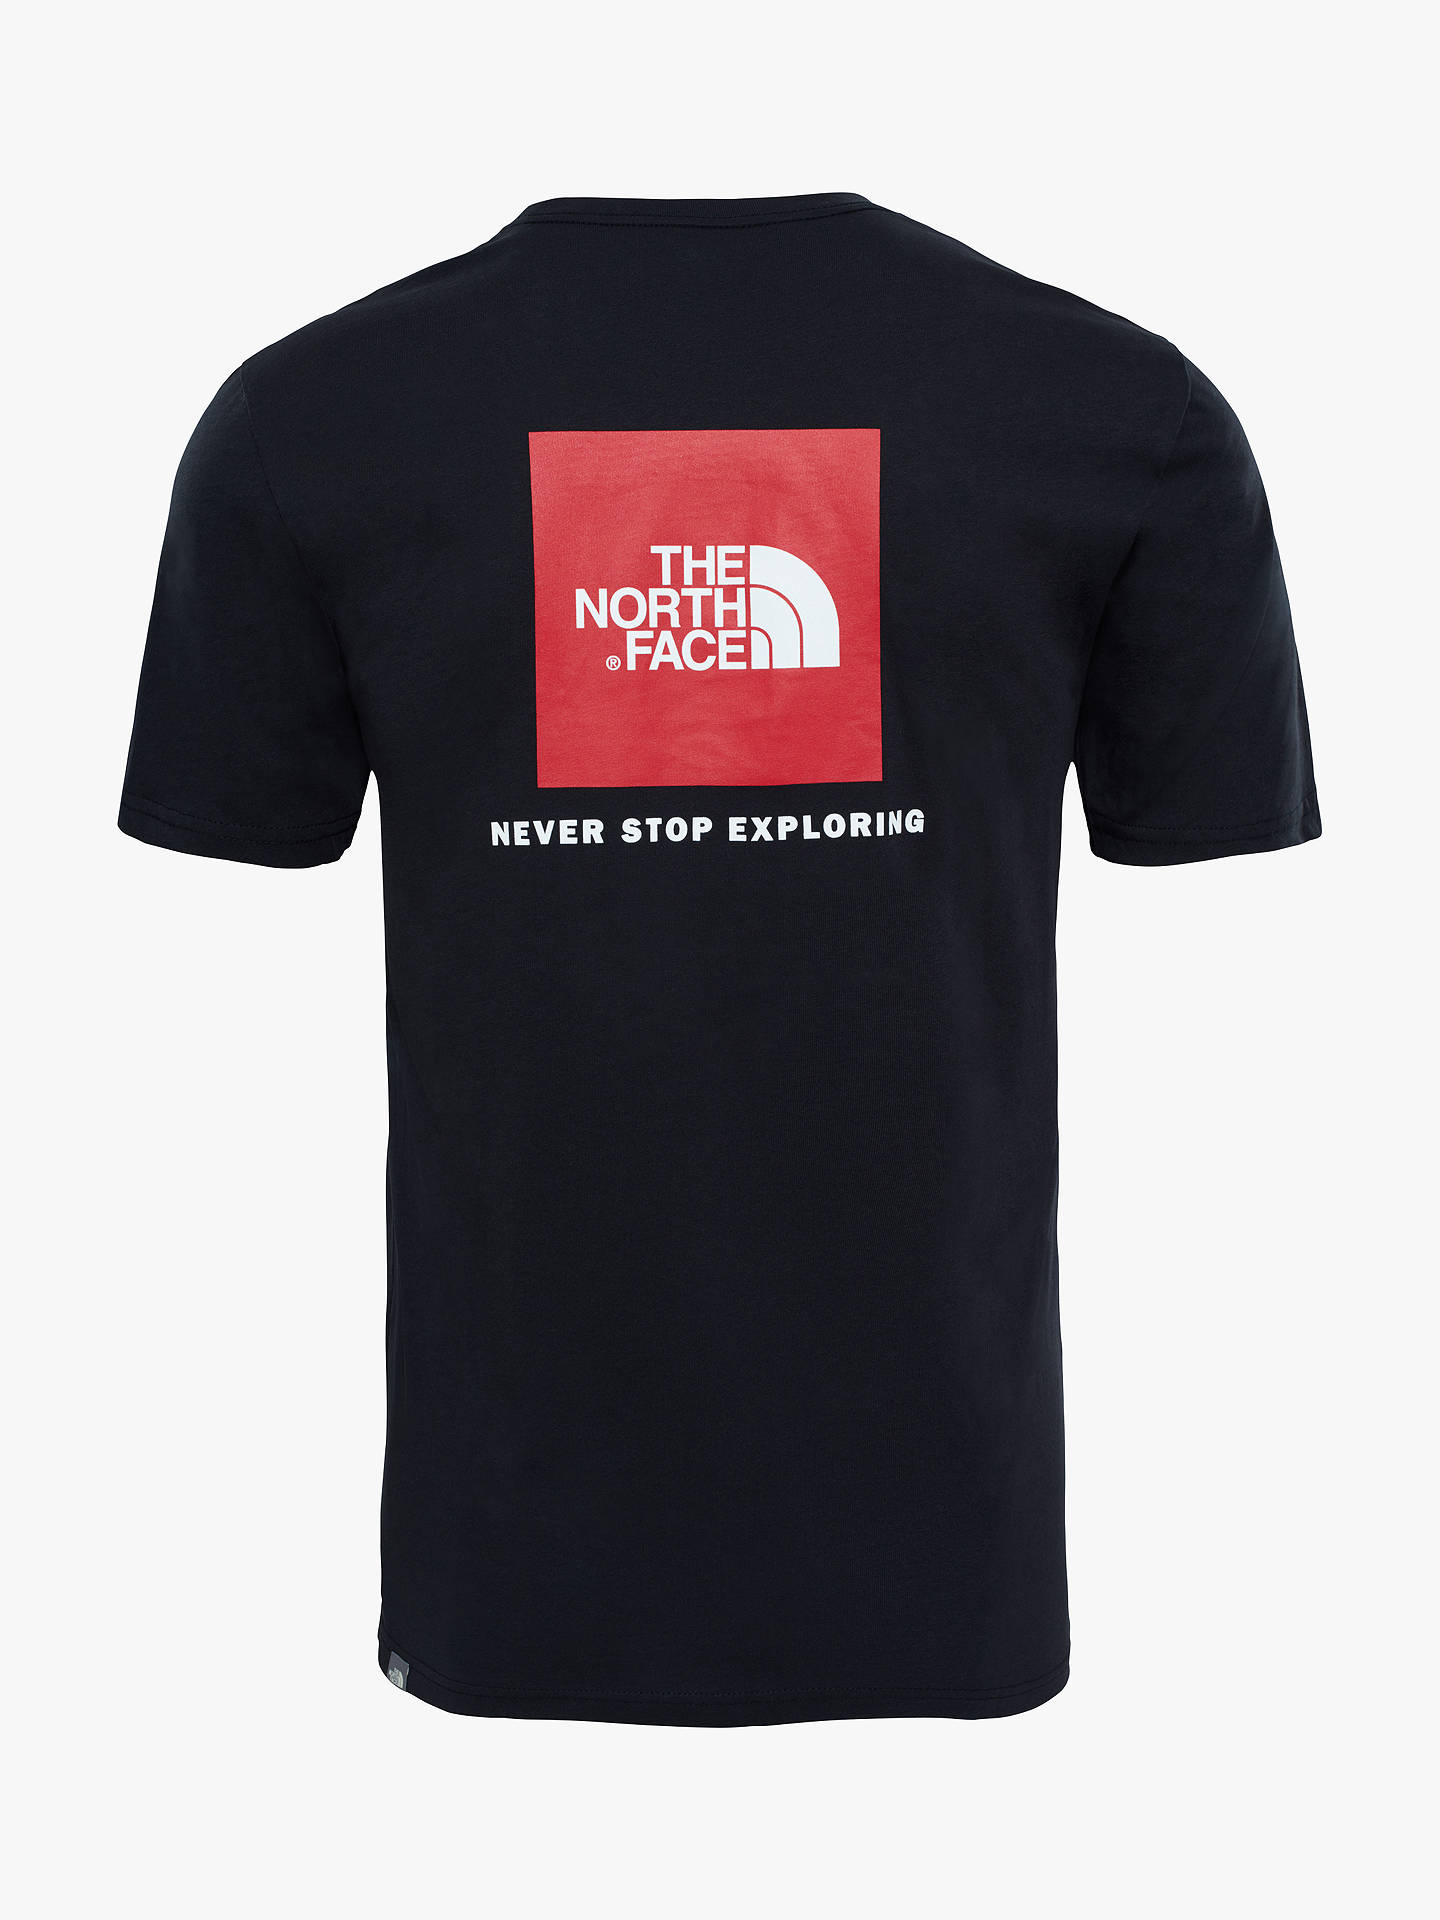 The North Face Red Box T Shirt At John Lewis Partners